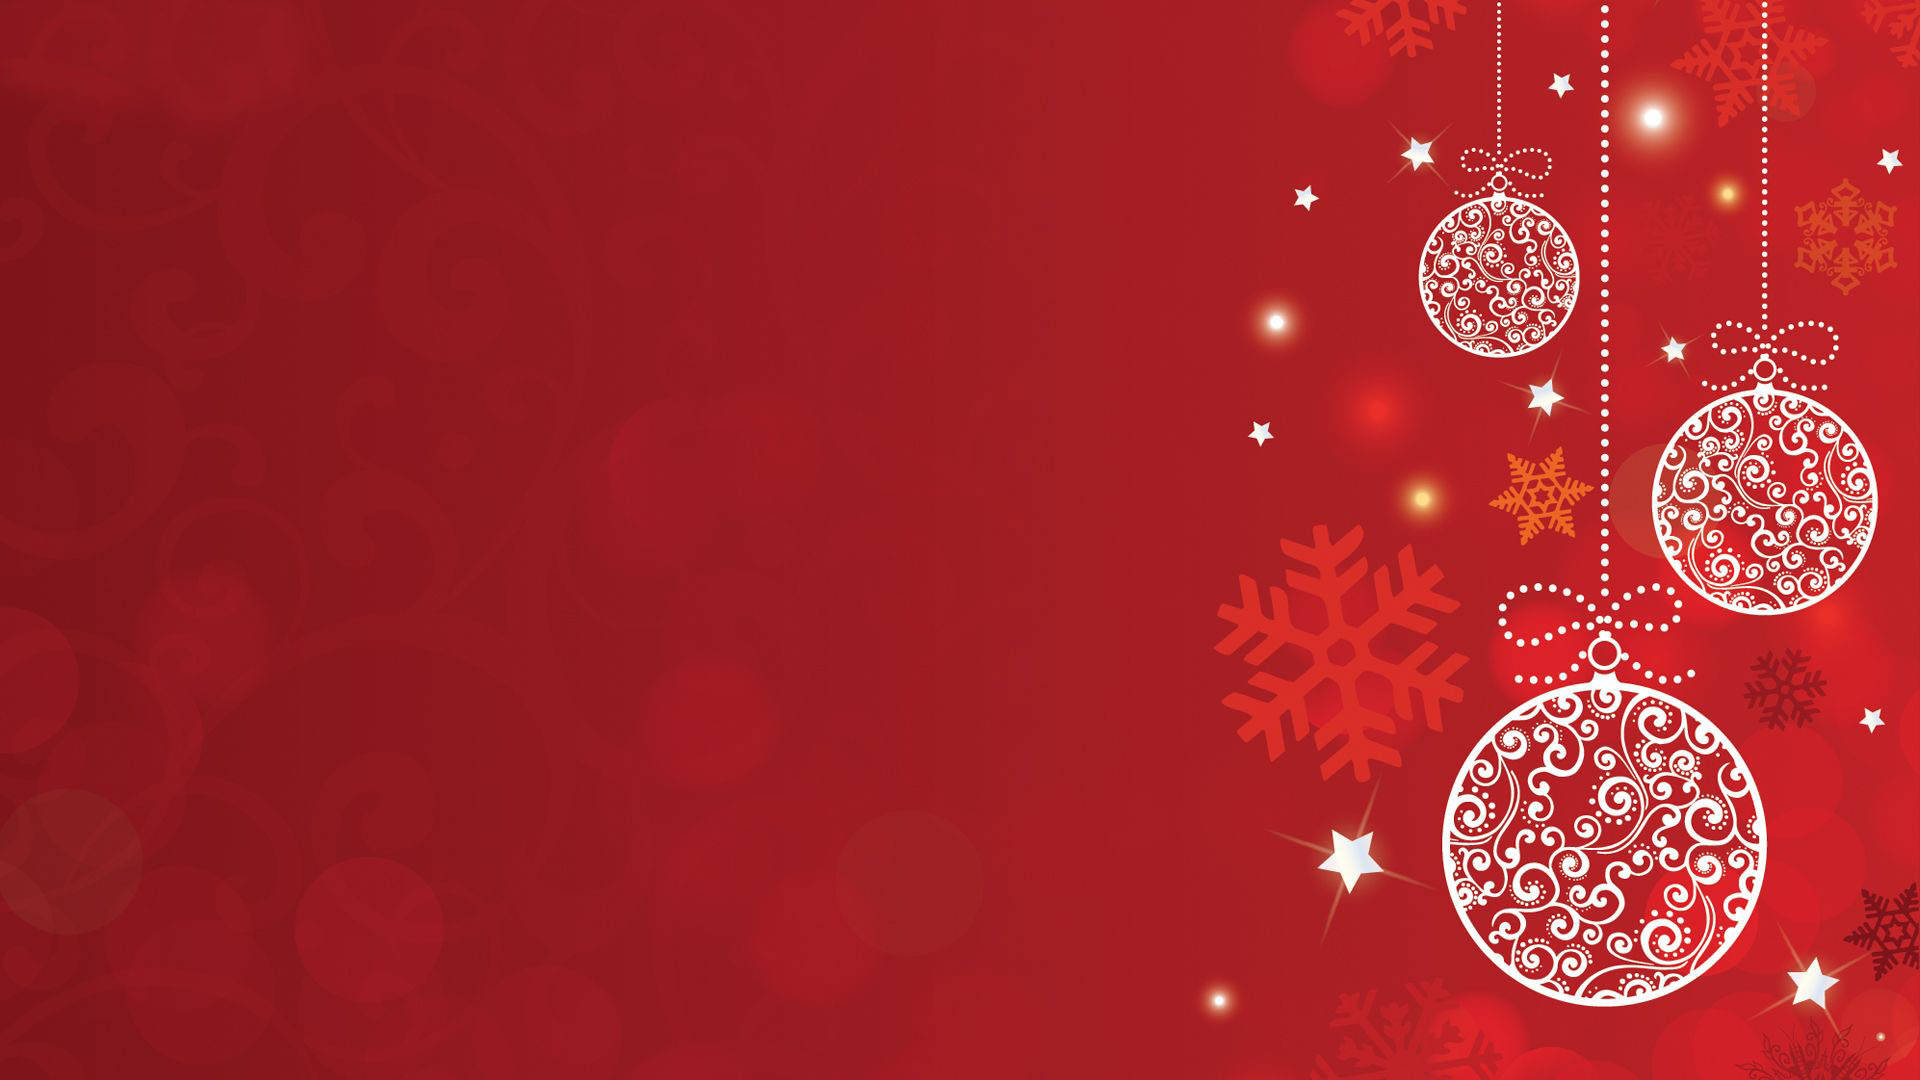 Download Simple Red And White Christmas Background Wallpaper | Wallpapers .com